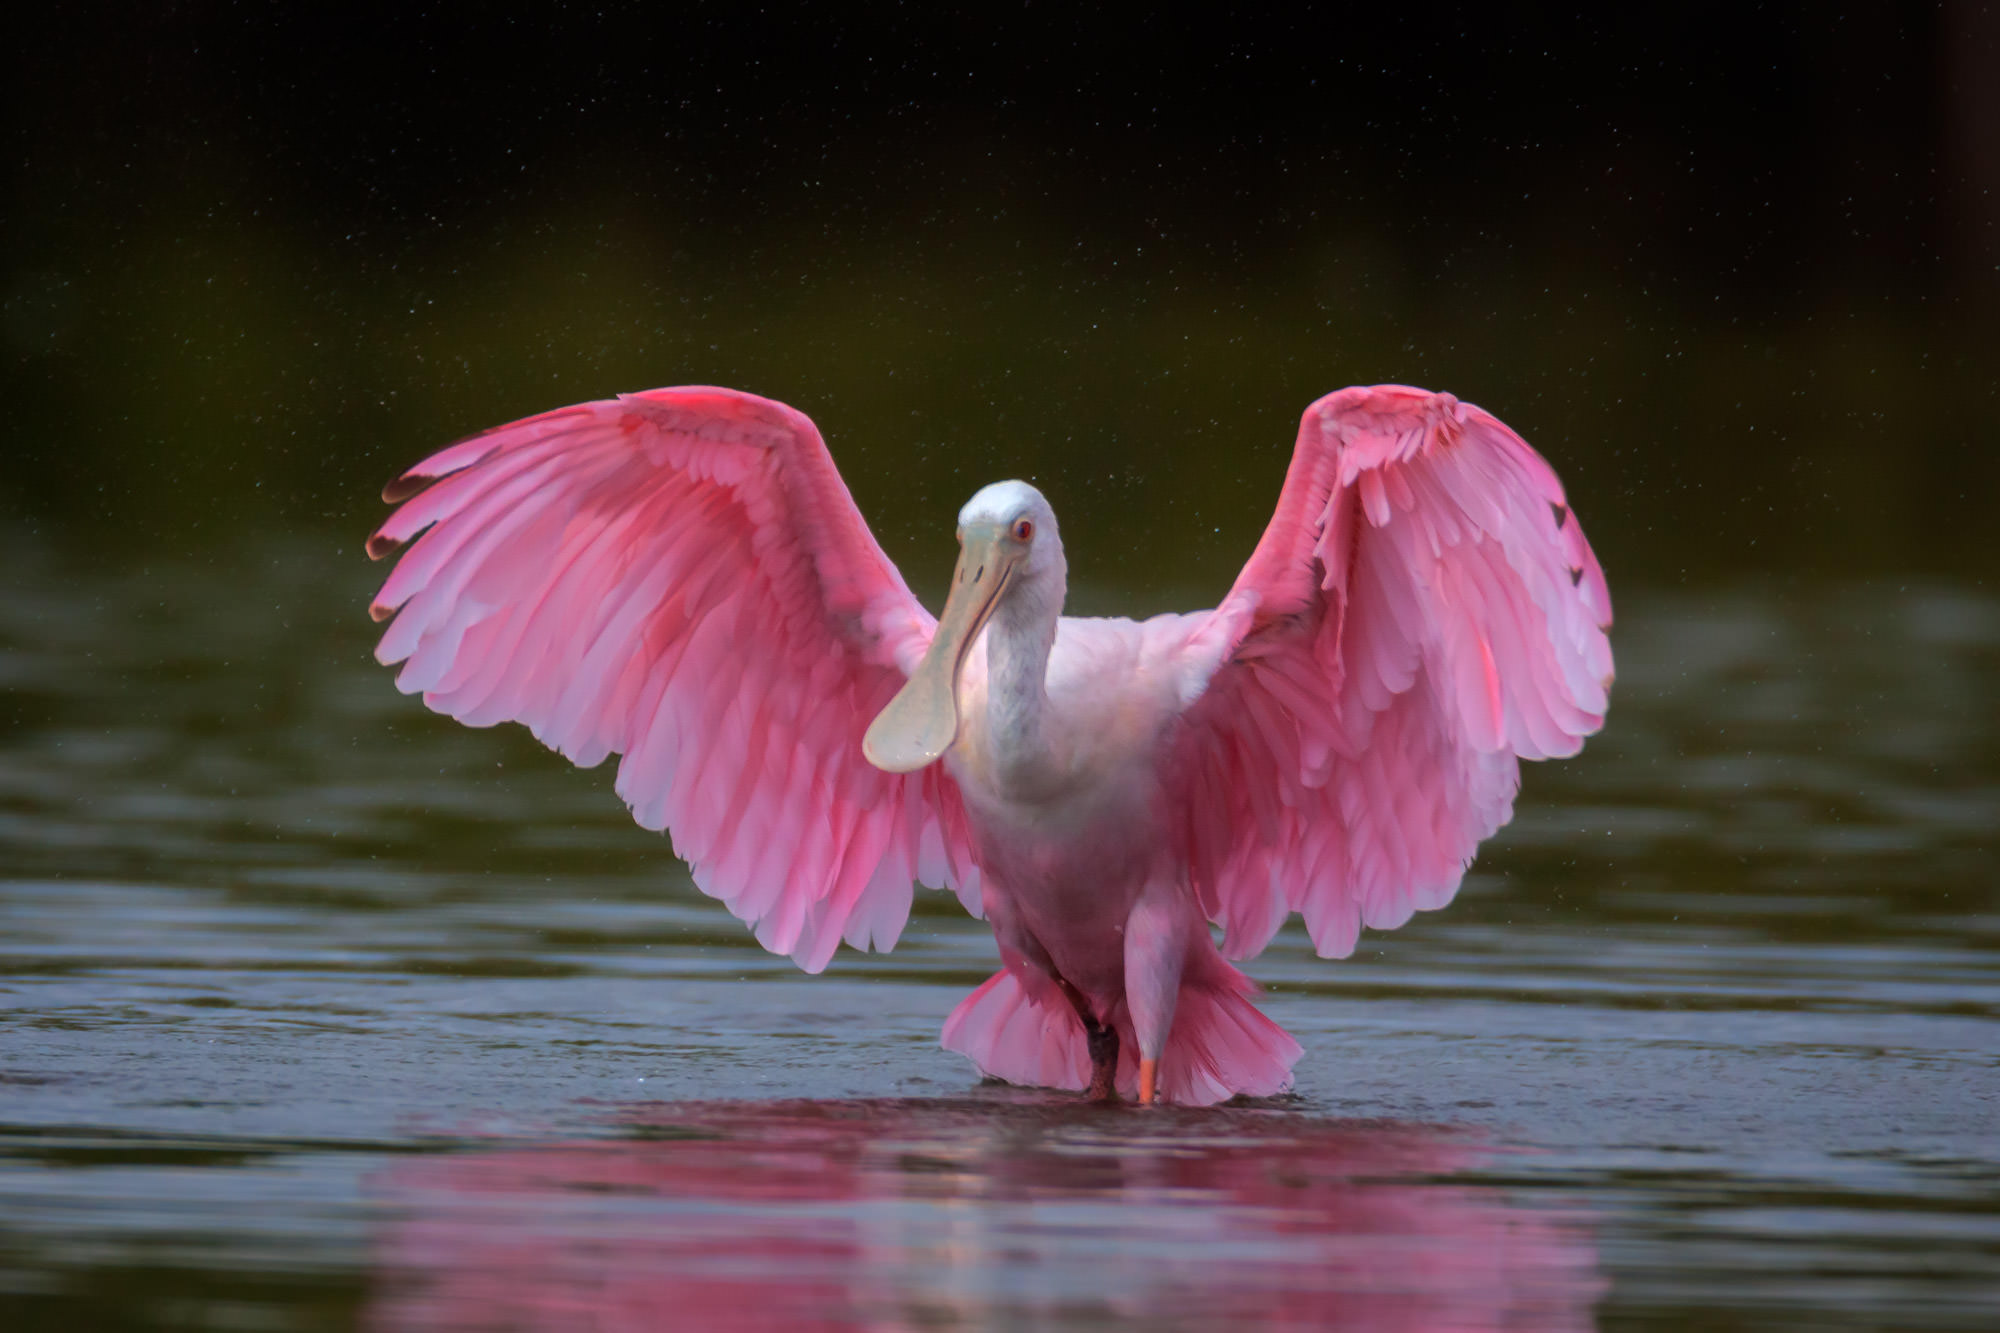 Roseate Spoonbill Pictures and Fine Art Photography Prints | Photos by Joseph C. Filer